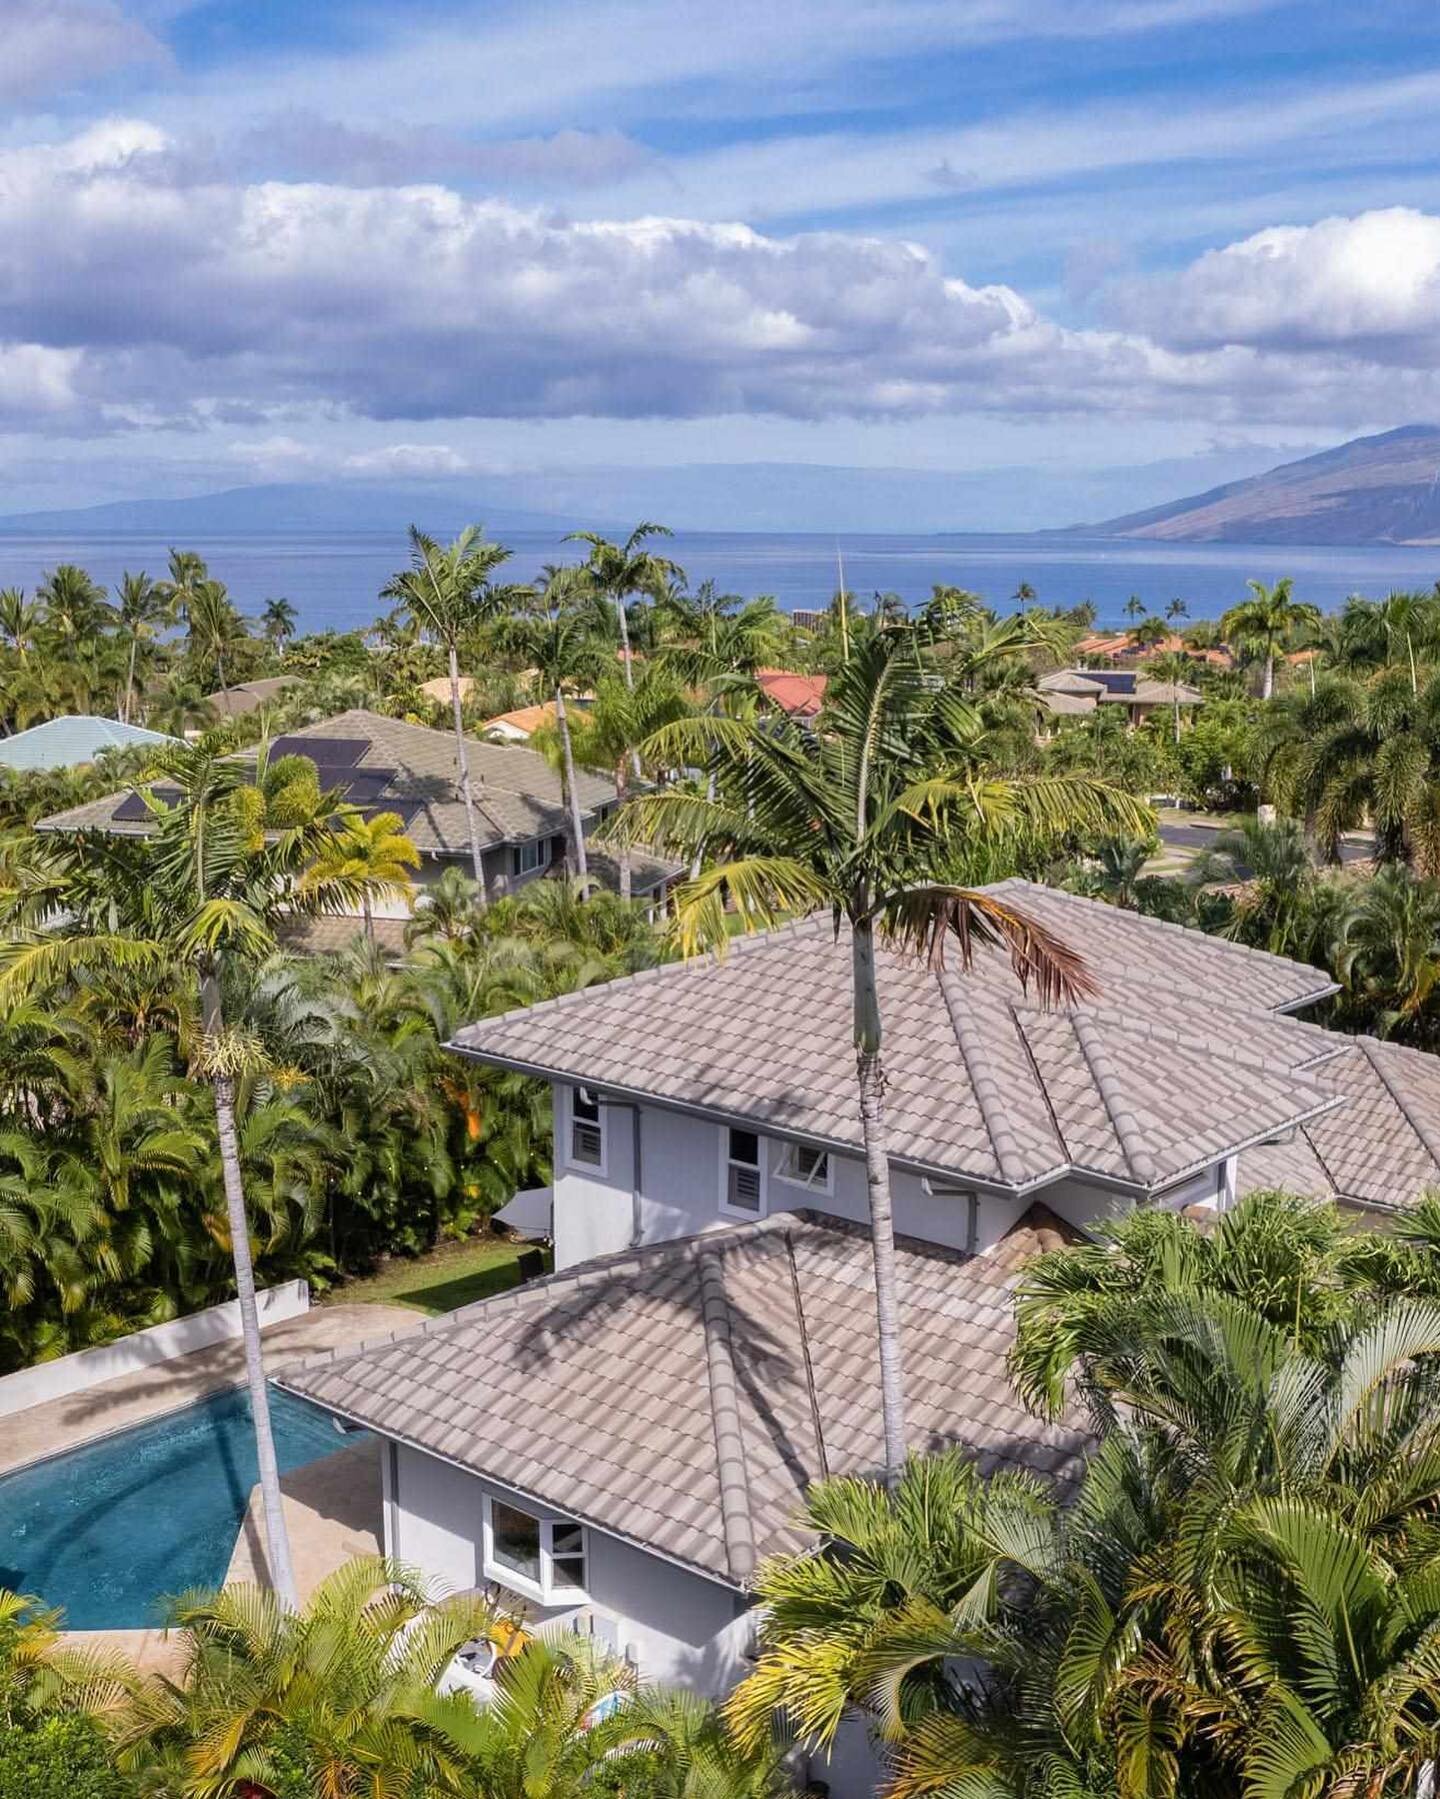 S U M M E R 🌞 A L L Y E A R &bull; This beautiful home is such a good deal in Wailea Pualani! Let me know if you&rsquo;d like to view it with me.

📍 361 Pualoa Nani Pl Kihei, HI 96753 🏡 3 🛌 4 🛀 2234sq 🌳 0.3ac flag lot with a pool

💰 Listed at 